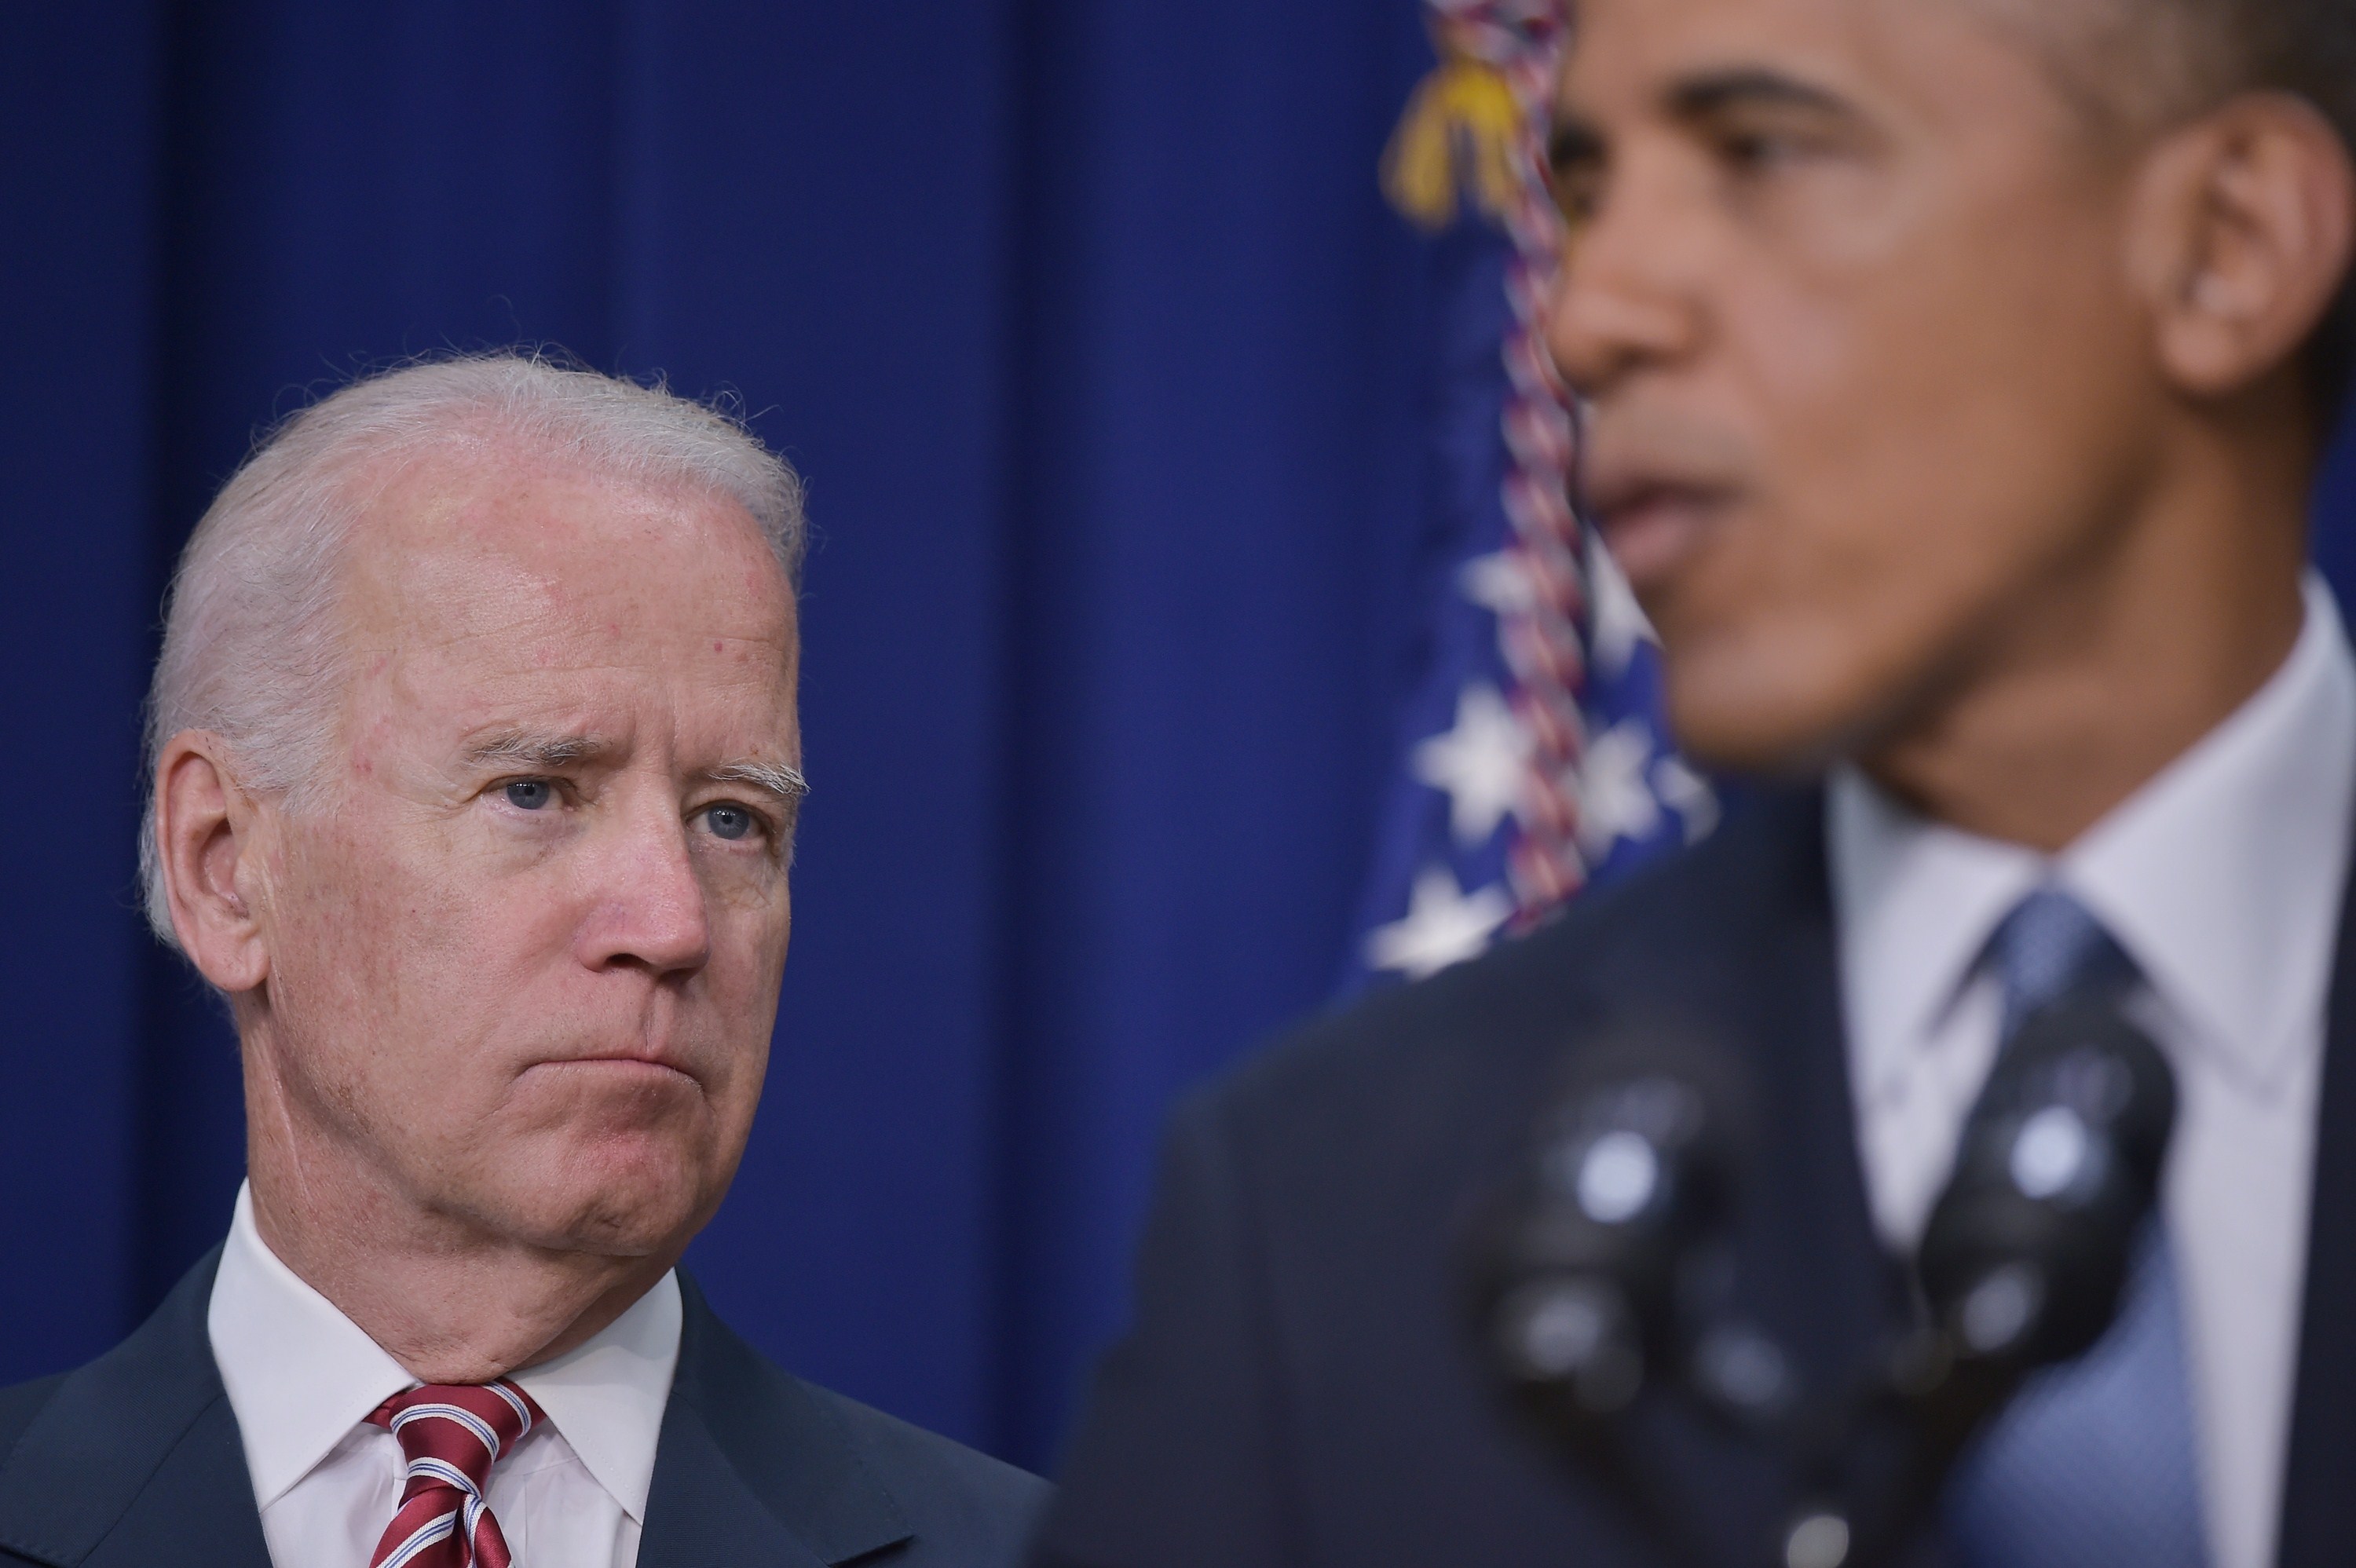 Vice President Joe Biden watches as President Barack Obama speaks during a signing ceremony for H.R. 803, the Workforce Innovation and Opportunity Act, on July 22, 2014 in the South Court Auditorium of the Eisenhower Executive Office Building, next to the White House in Washington, DC. (MANDEL NGAN&mdash;AFP/Getty Images)